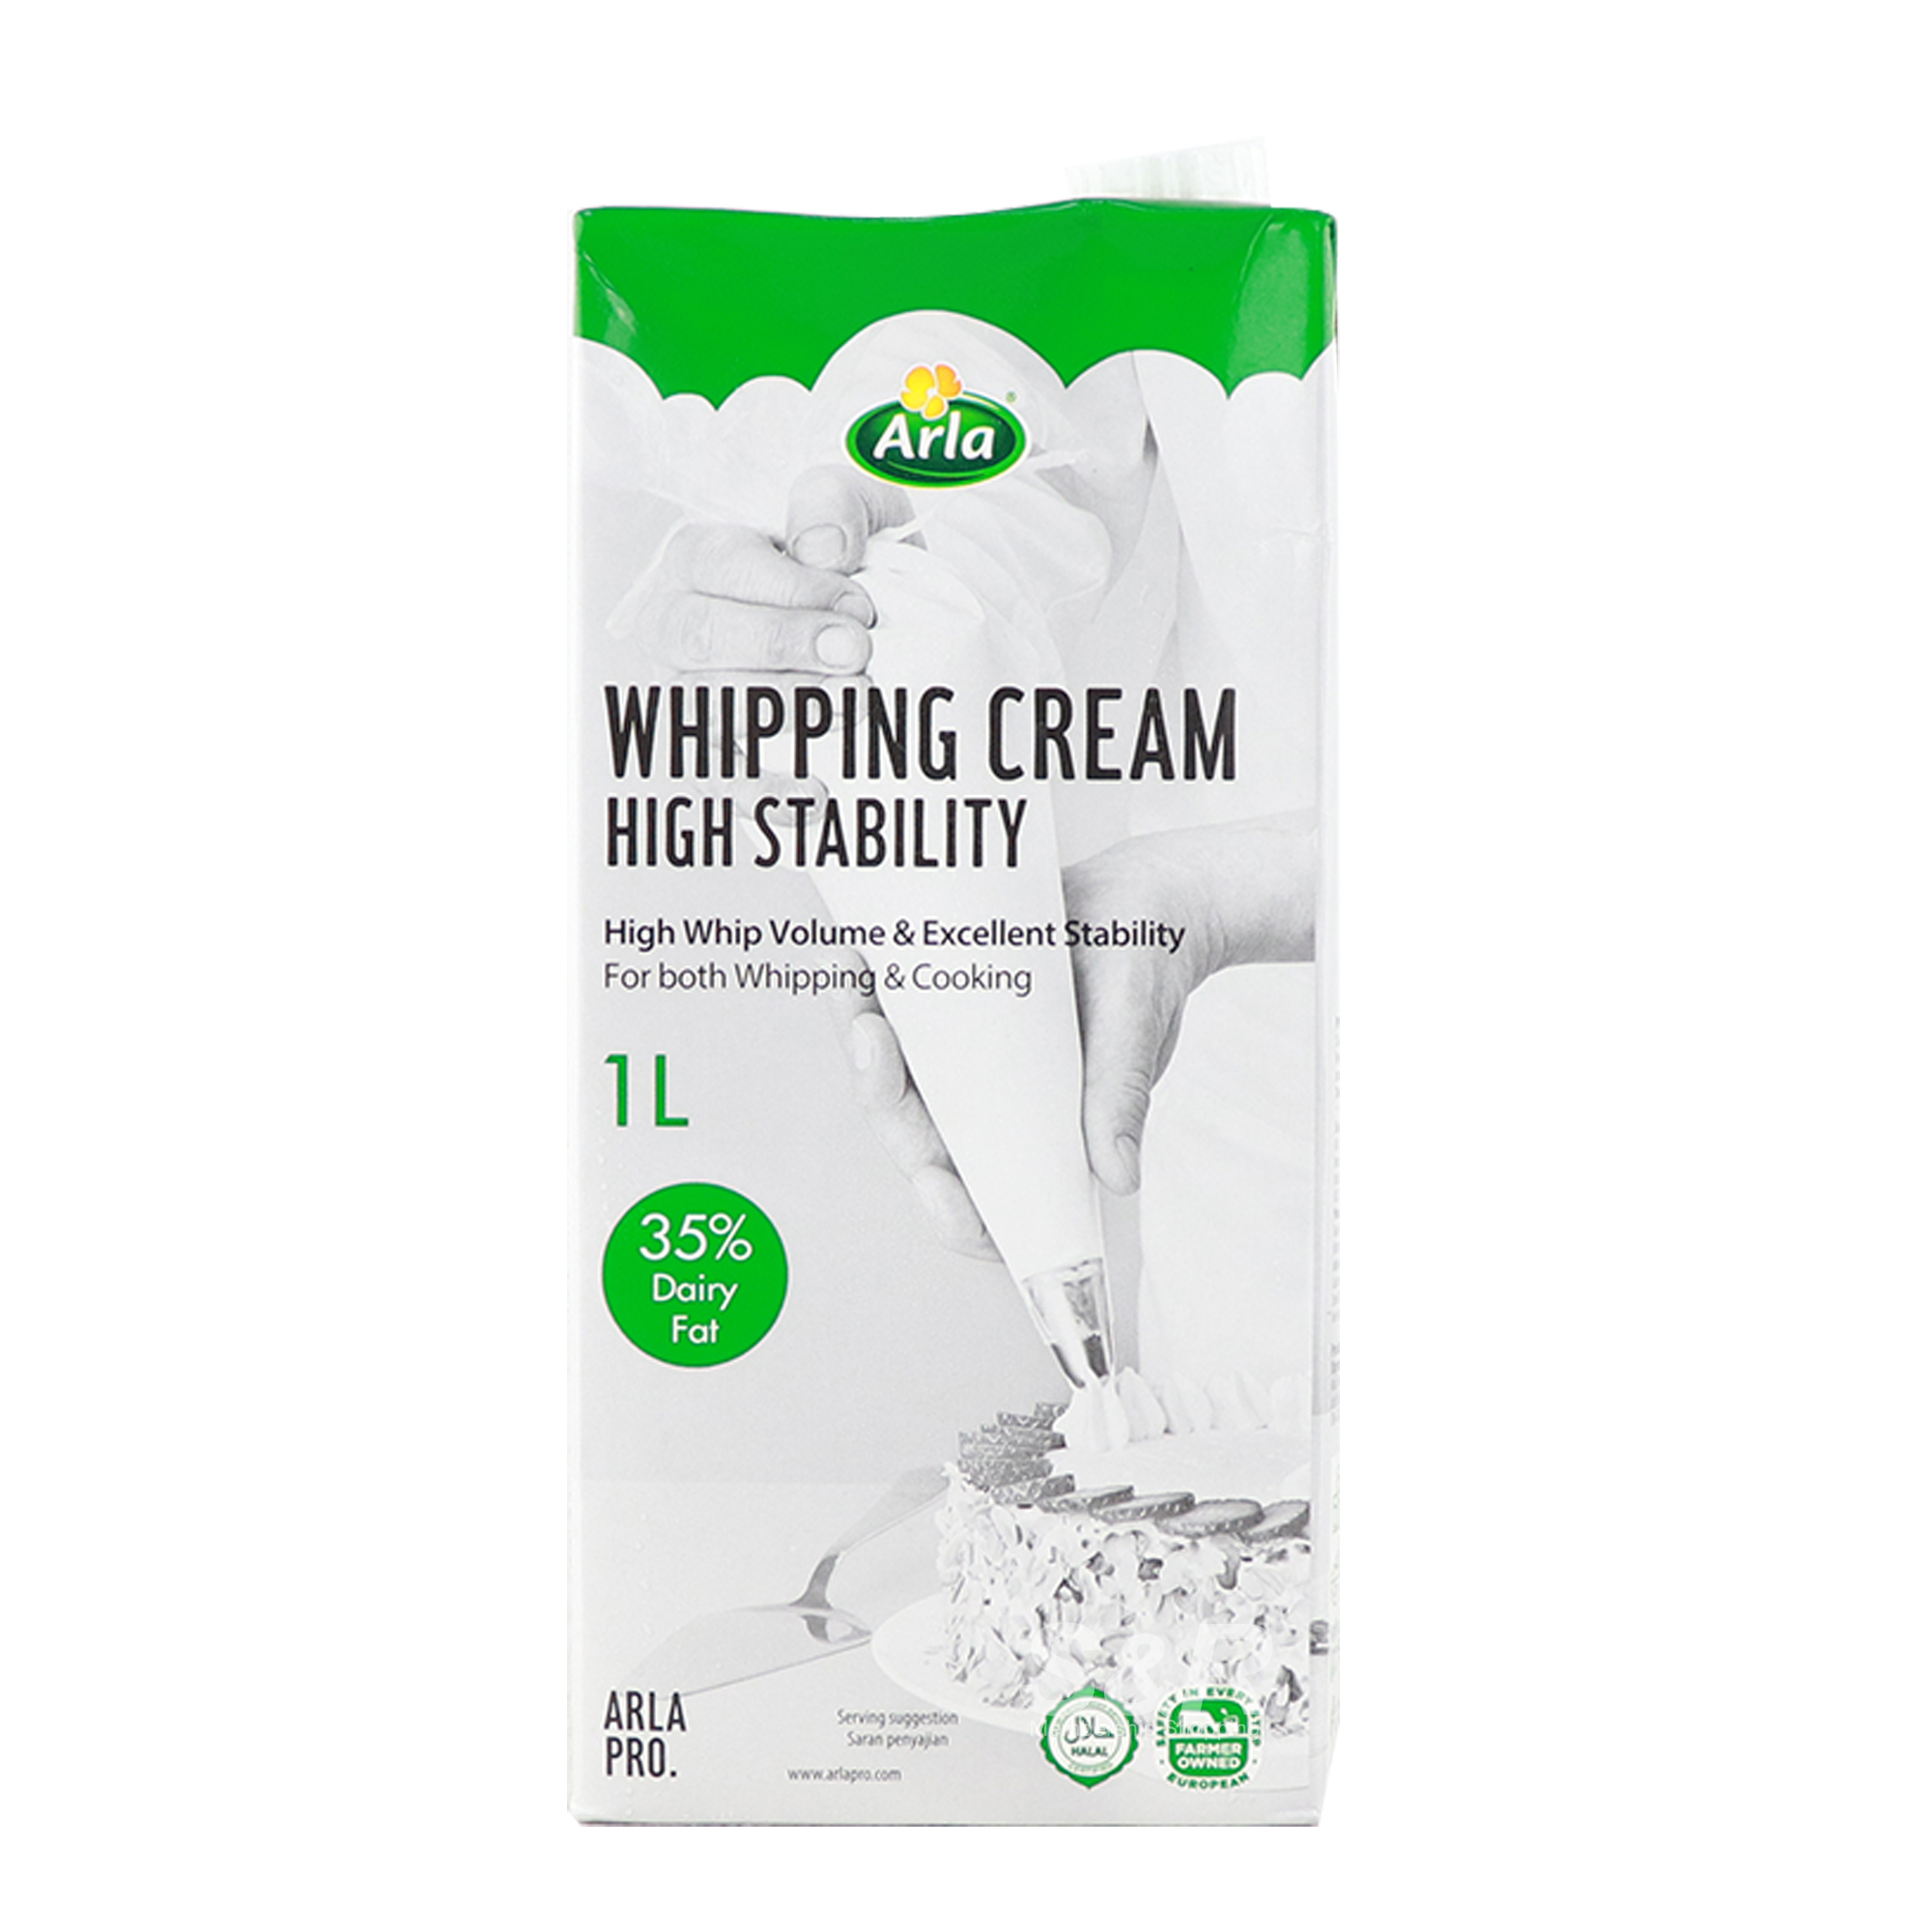 Arla Pro Whipping Cream High Stability 1L